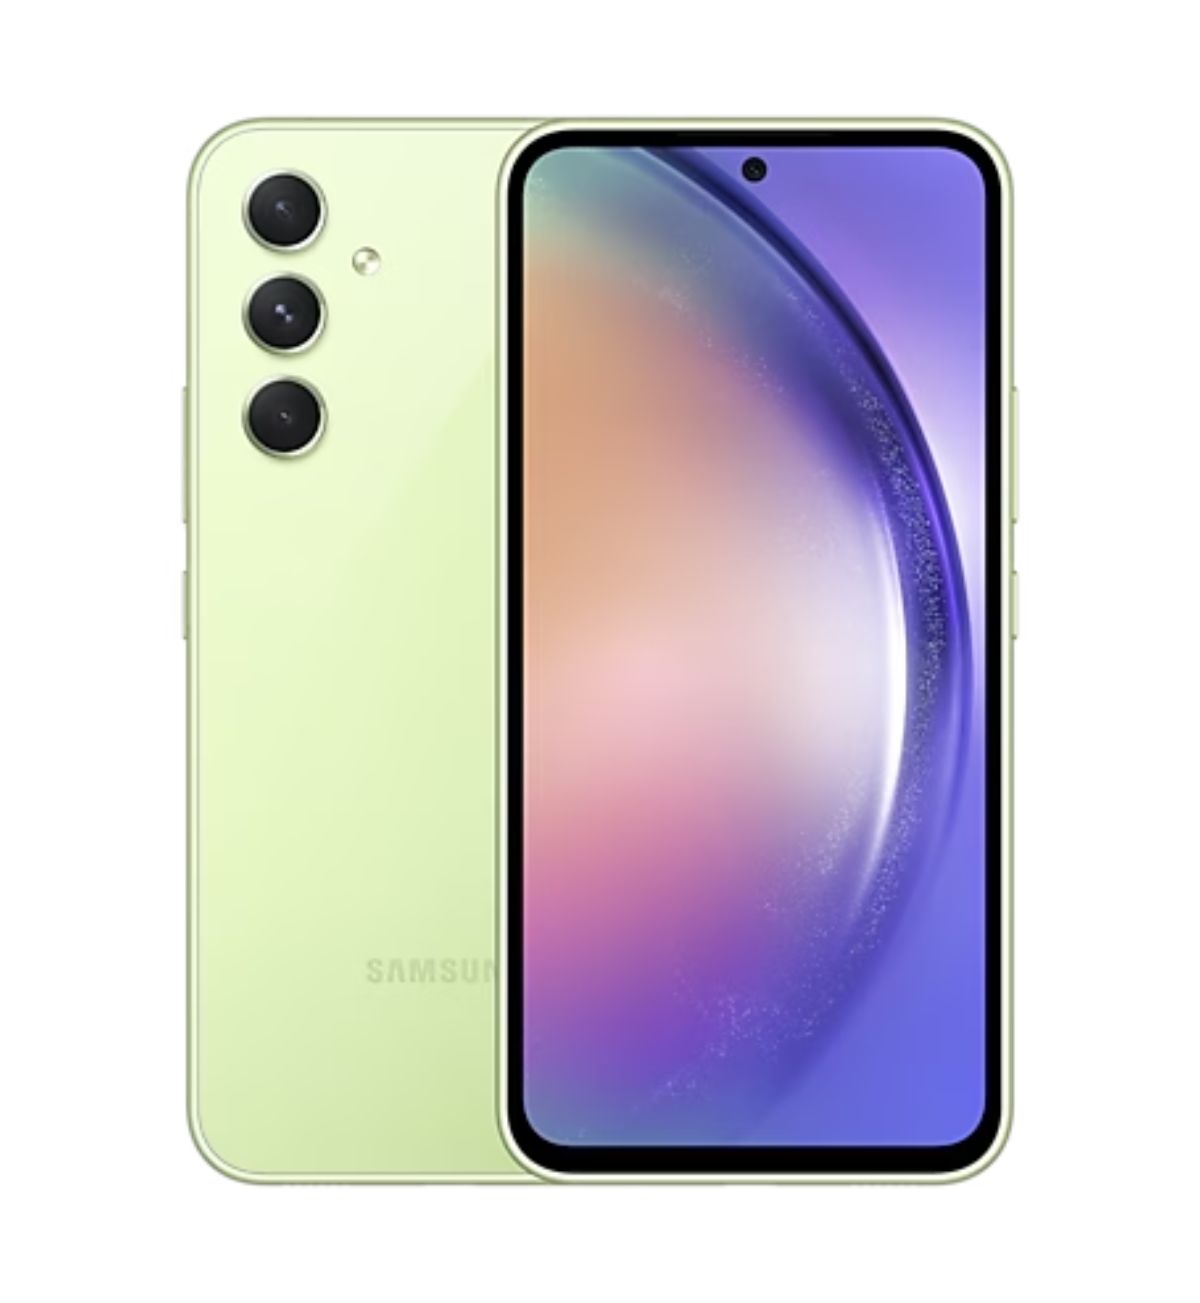 Close-up image of the Samsung Galaxy A54 5G in Awesome Lime color, highlighting the sleek design and comfortable grip. Text overlay: "Stand out from the crowd with the Samsung Galaxy A54 5G's vibrant Awesome Lime color (UK)